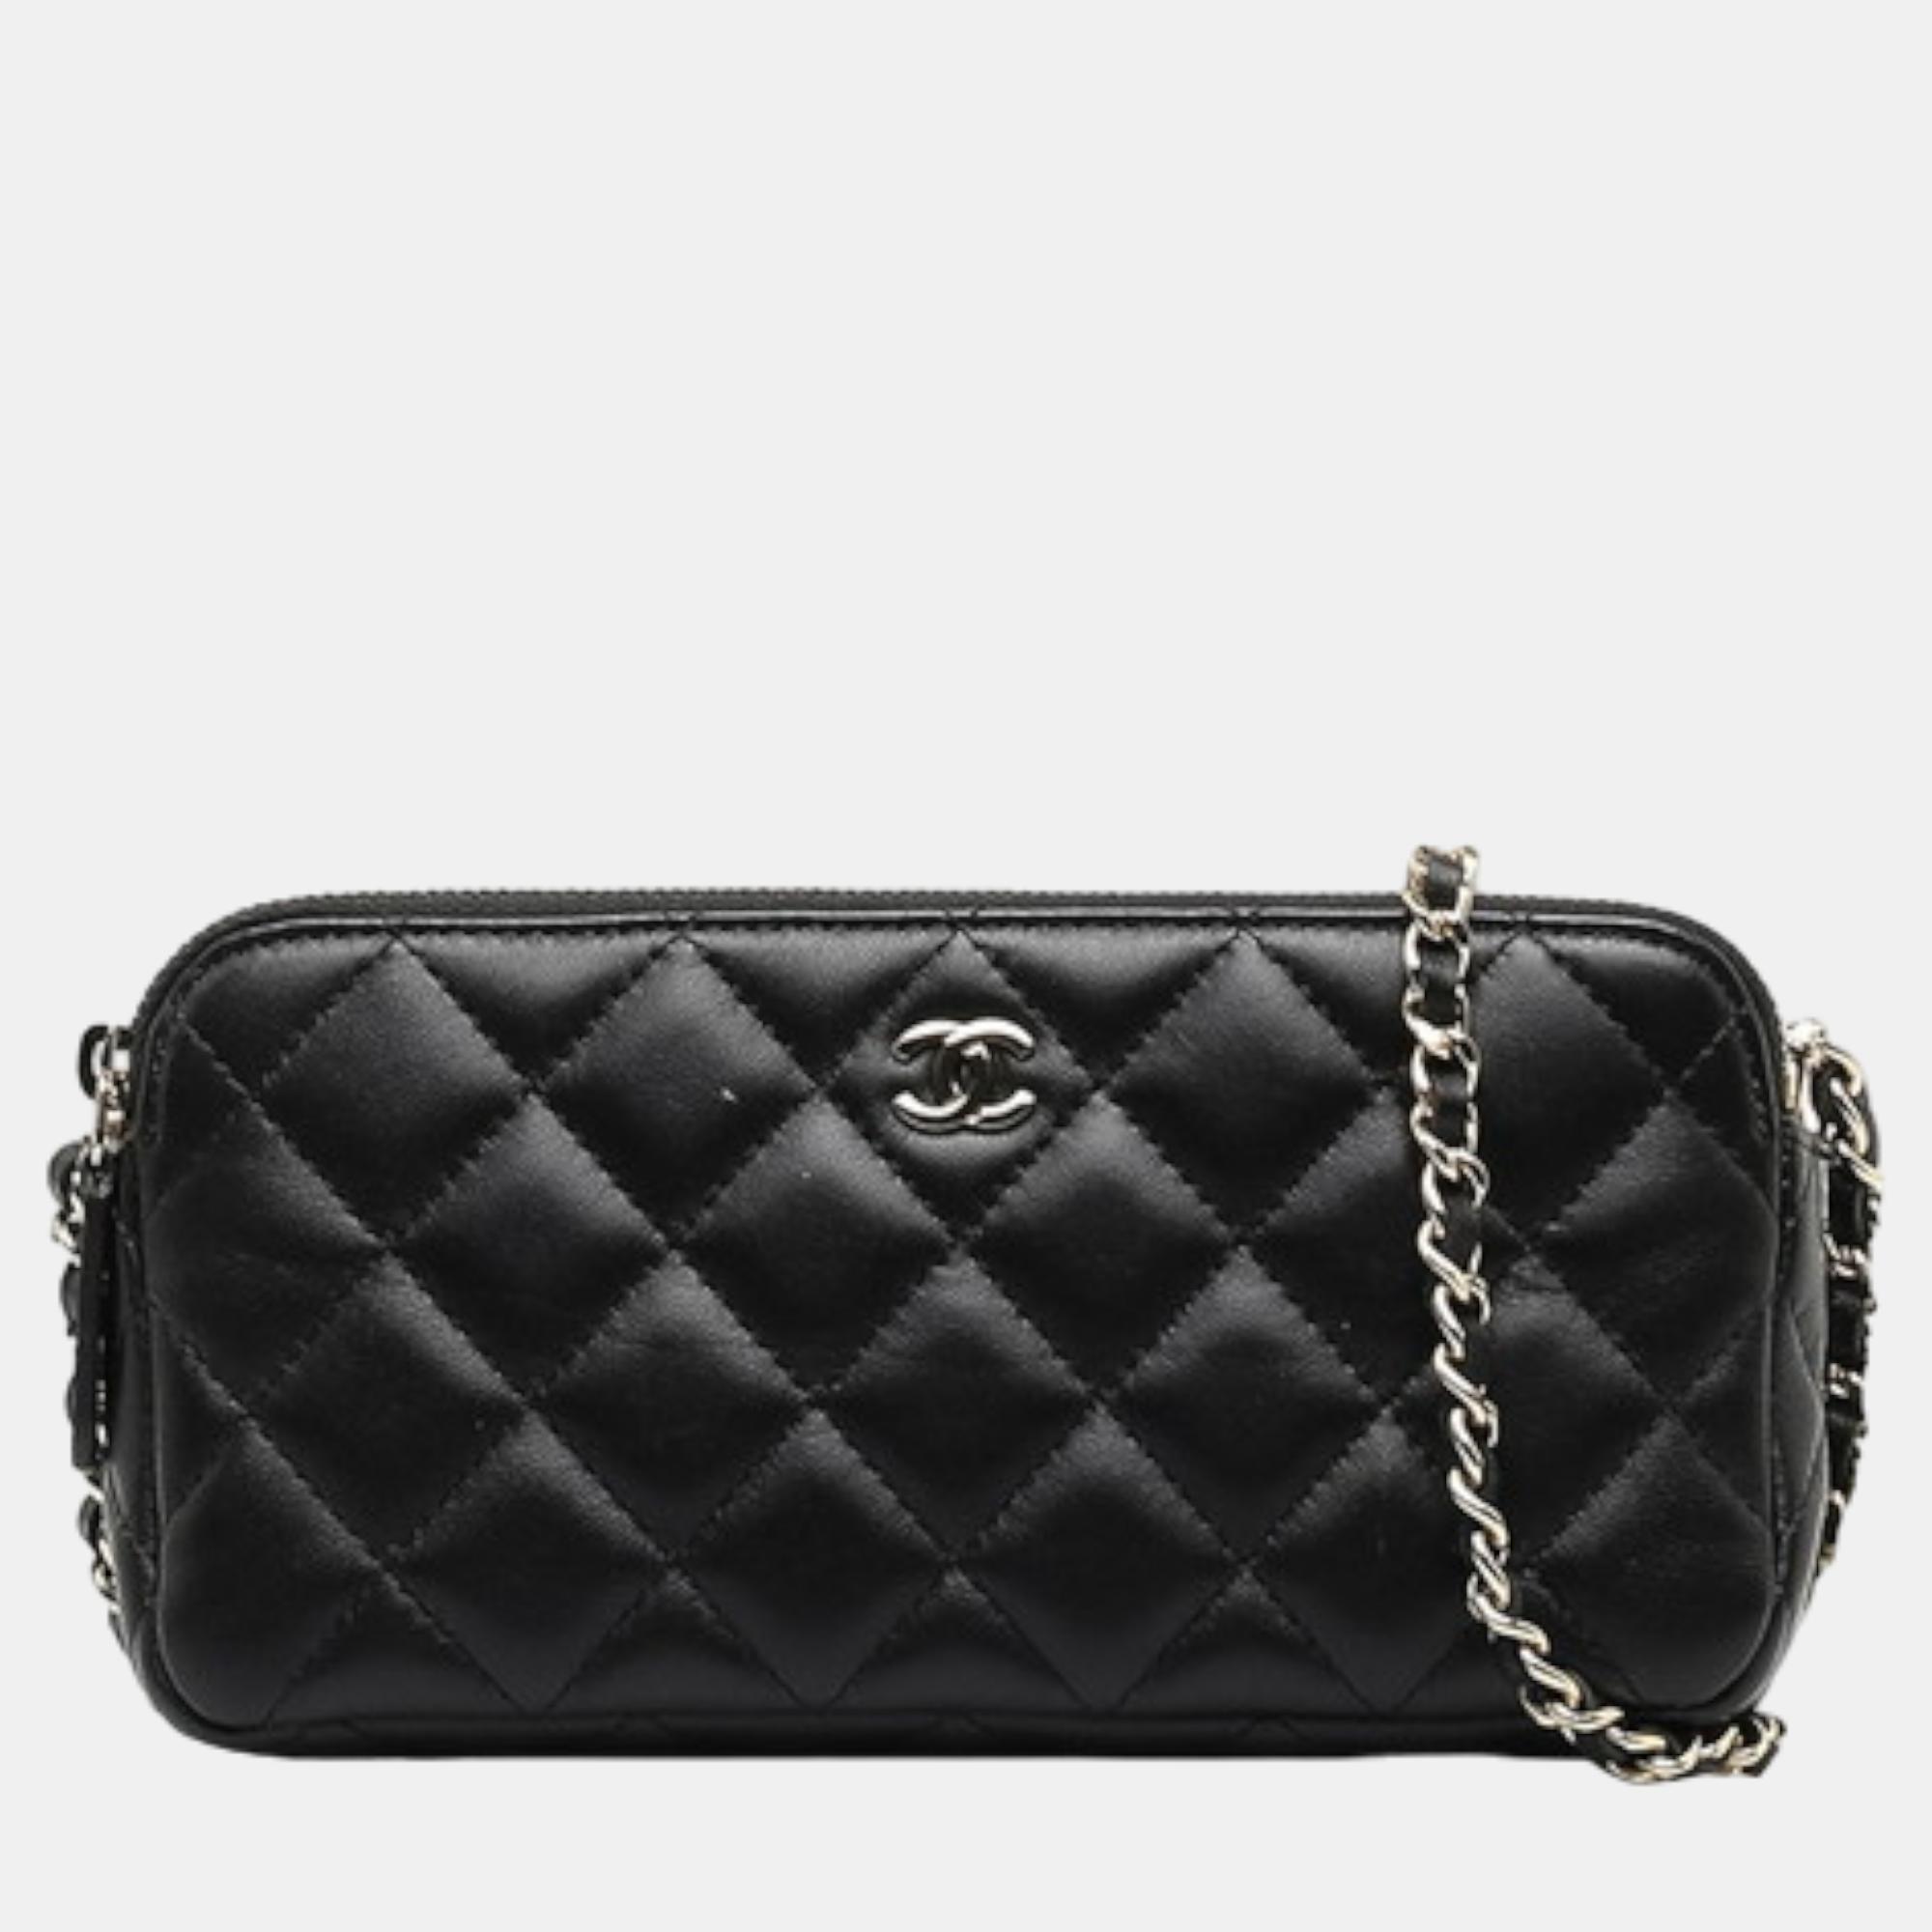 Chanel black quilted double zip clutch w/ chain